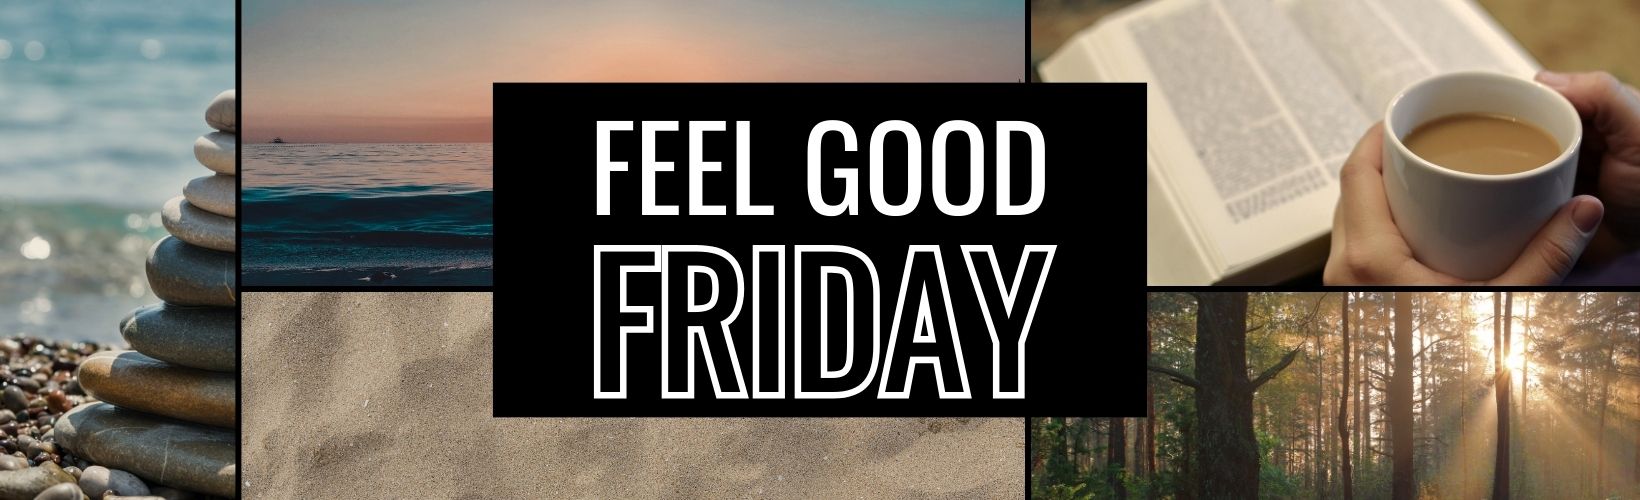 Feel Good Friday: How to Celebrate Your Achievements and Growth